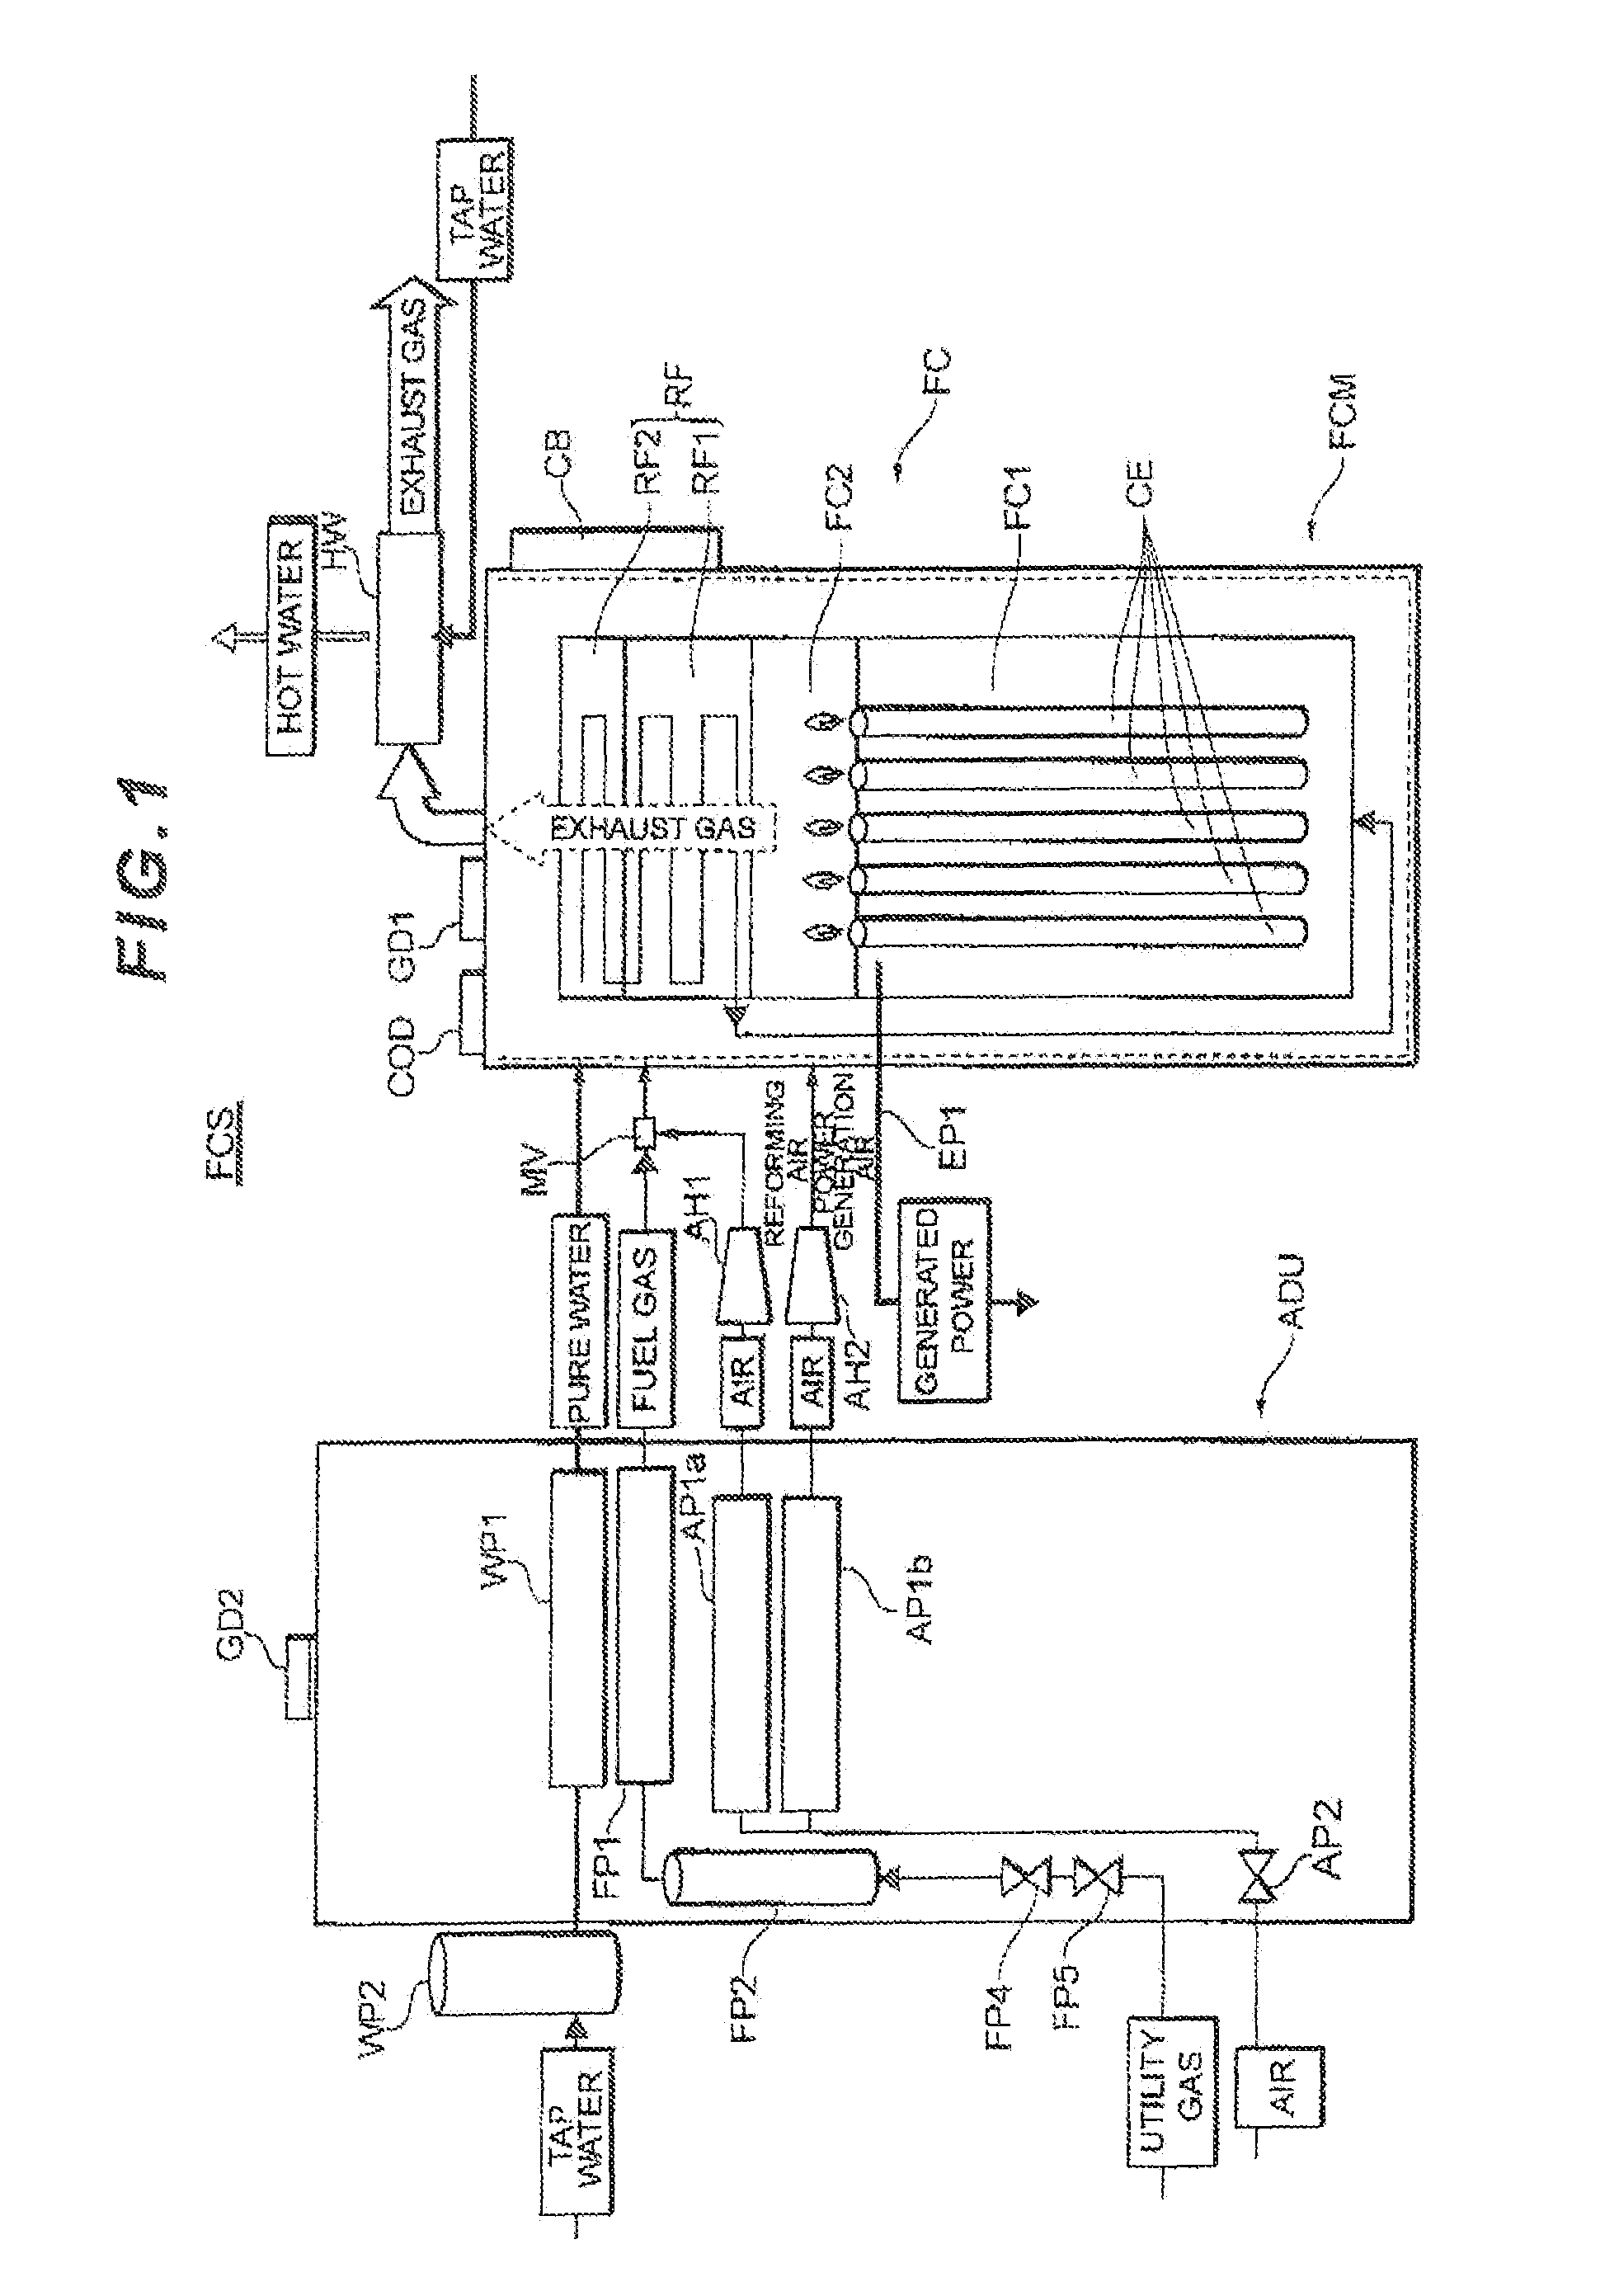 Fuel cell system having controllable water feed flow rate